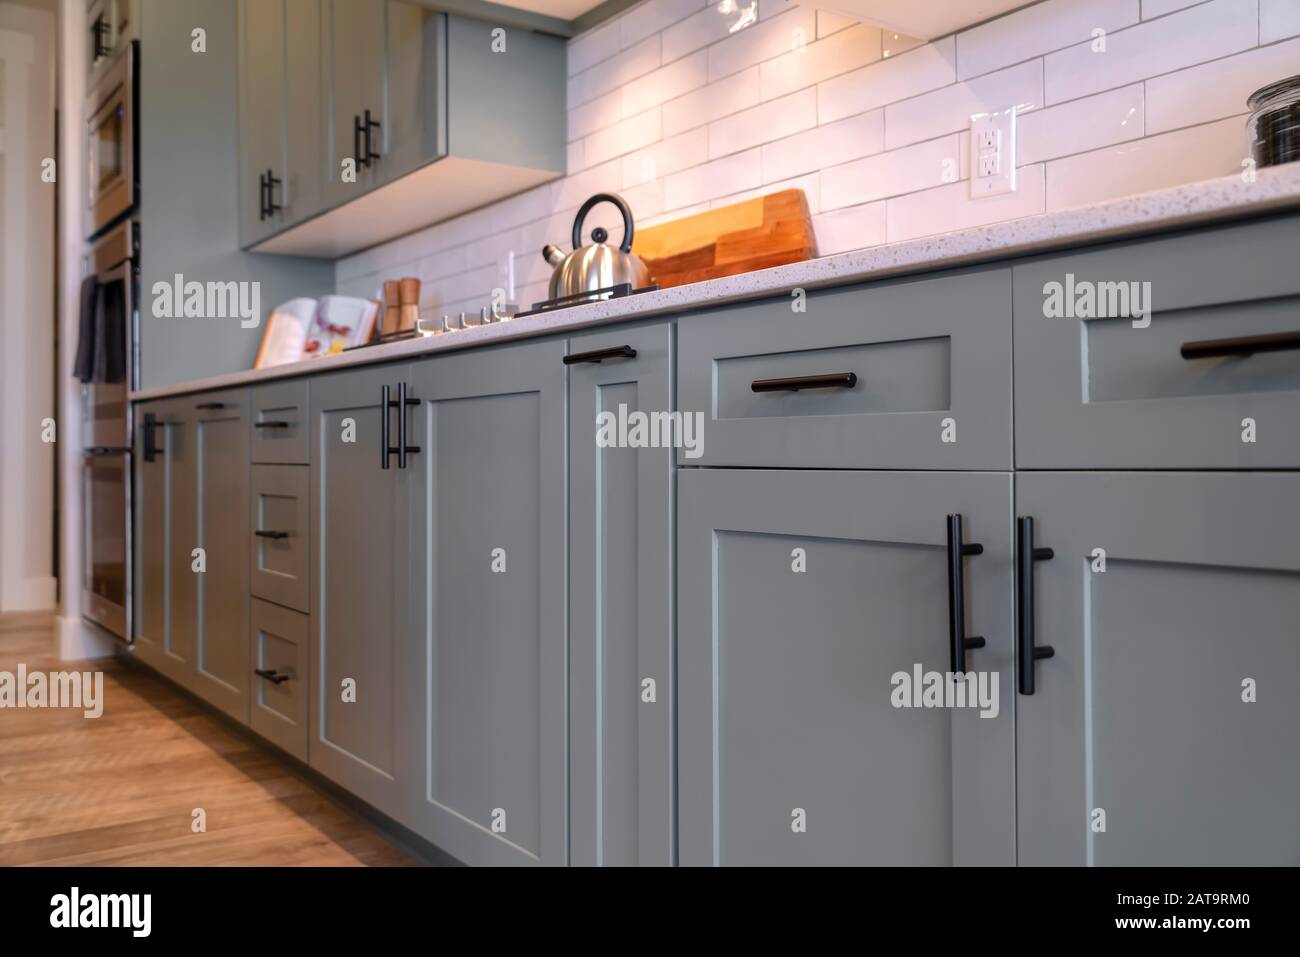 Kitchen Cabinets With White Countertop Black Handles And Tile